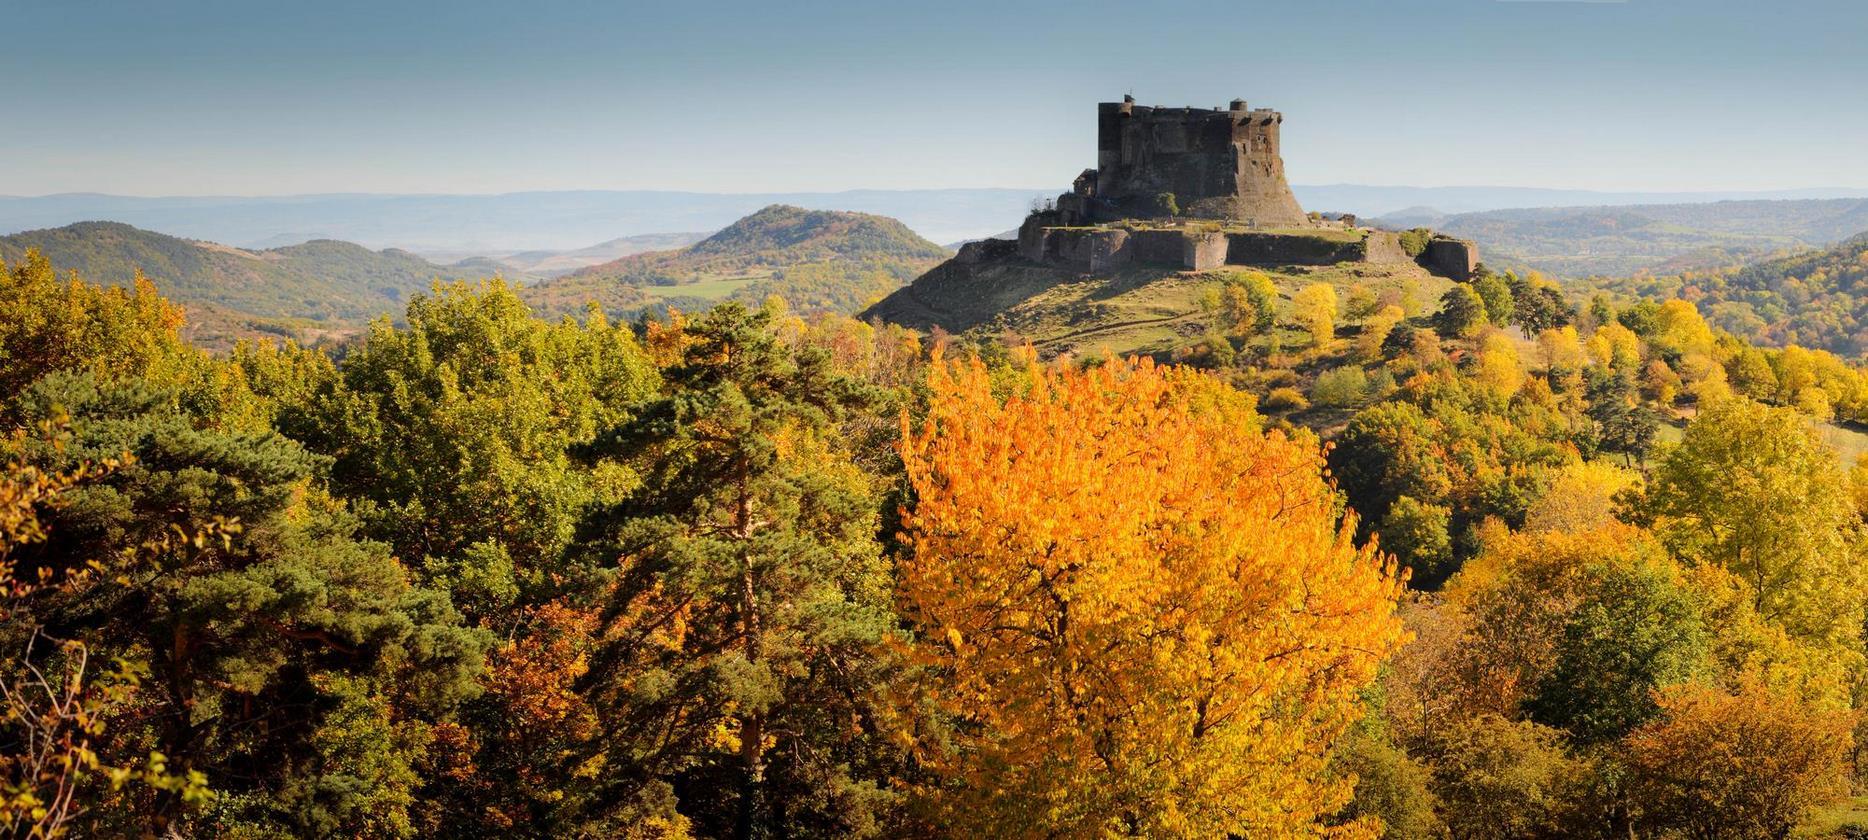 Chateau de Murol with a view of the Volcanoes of Auvergne